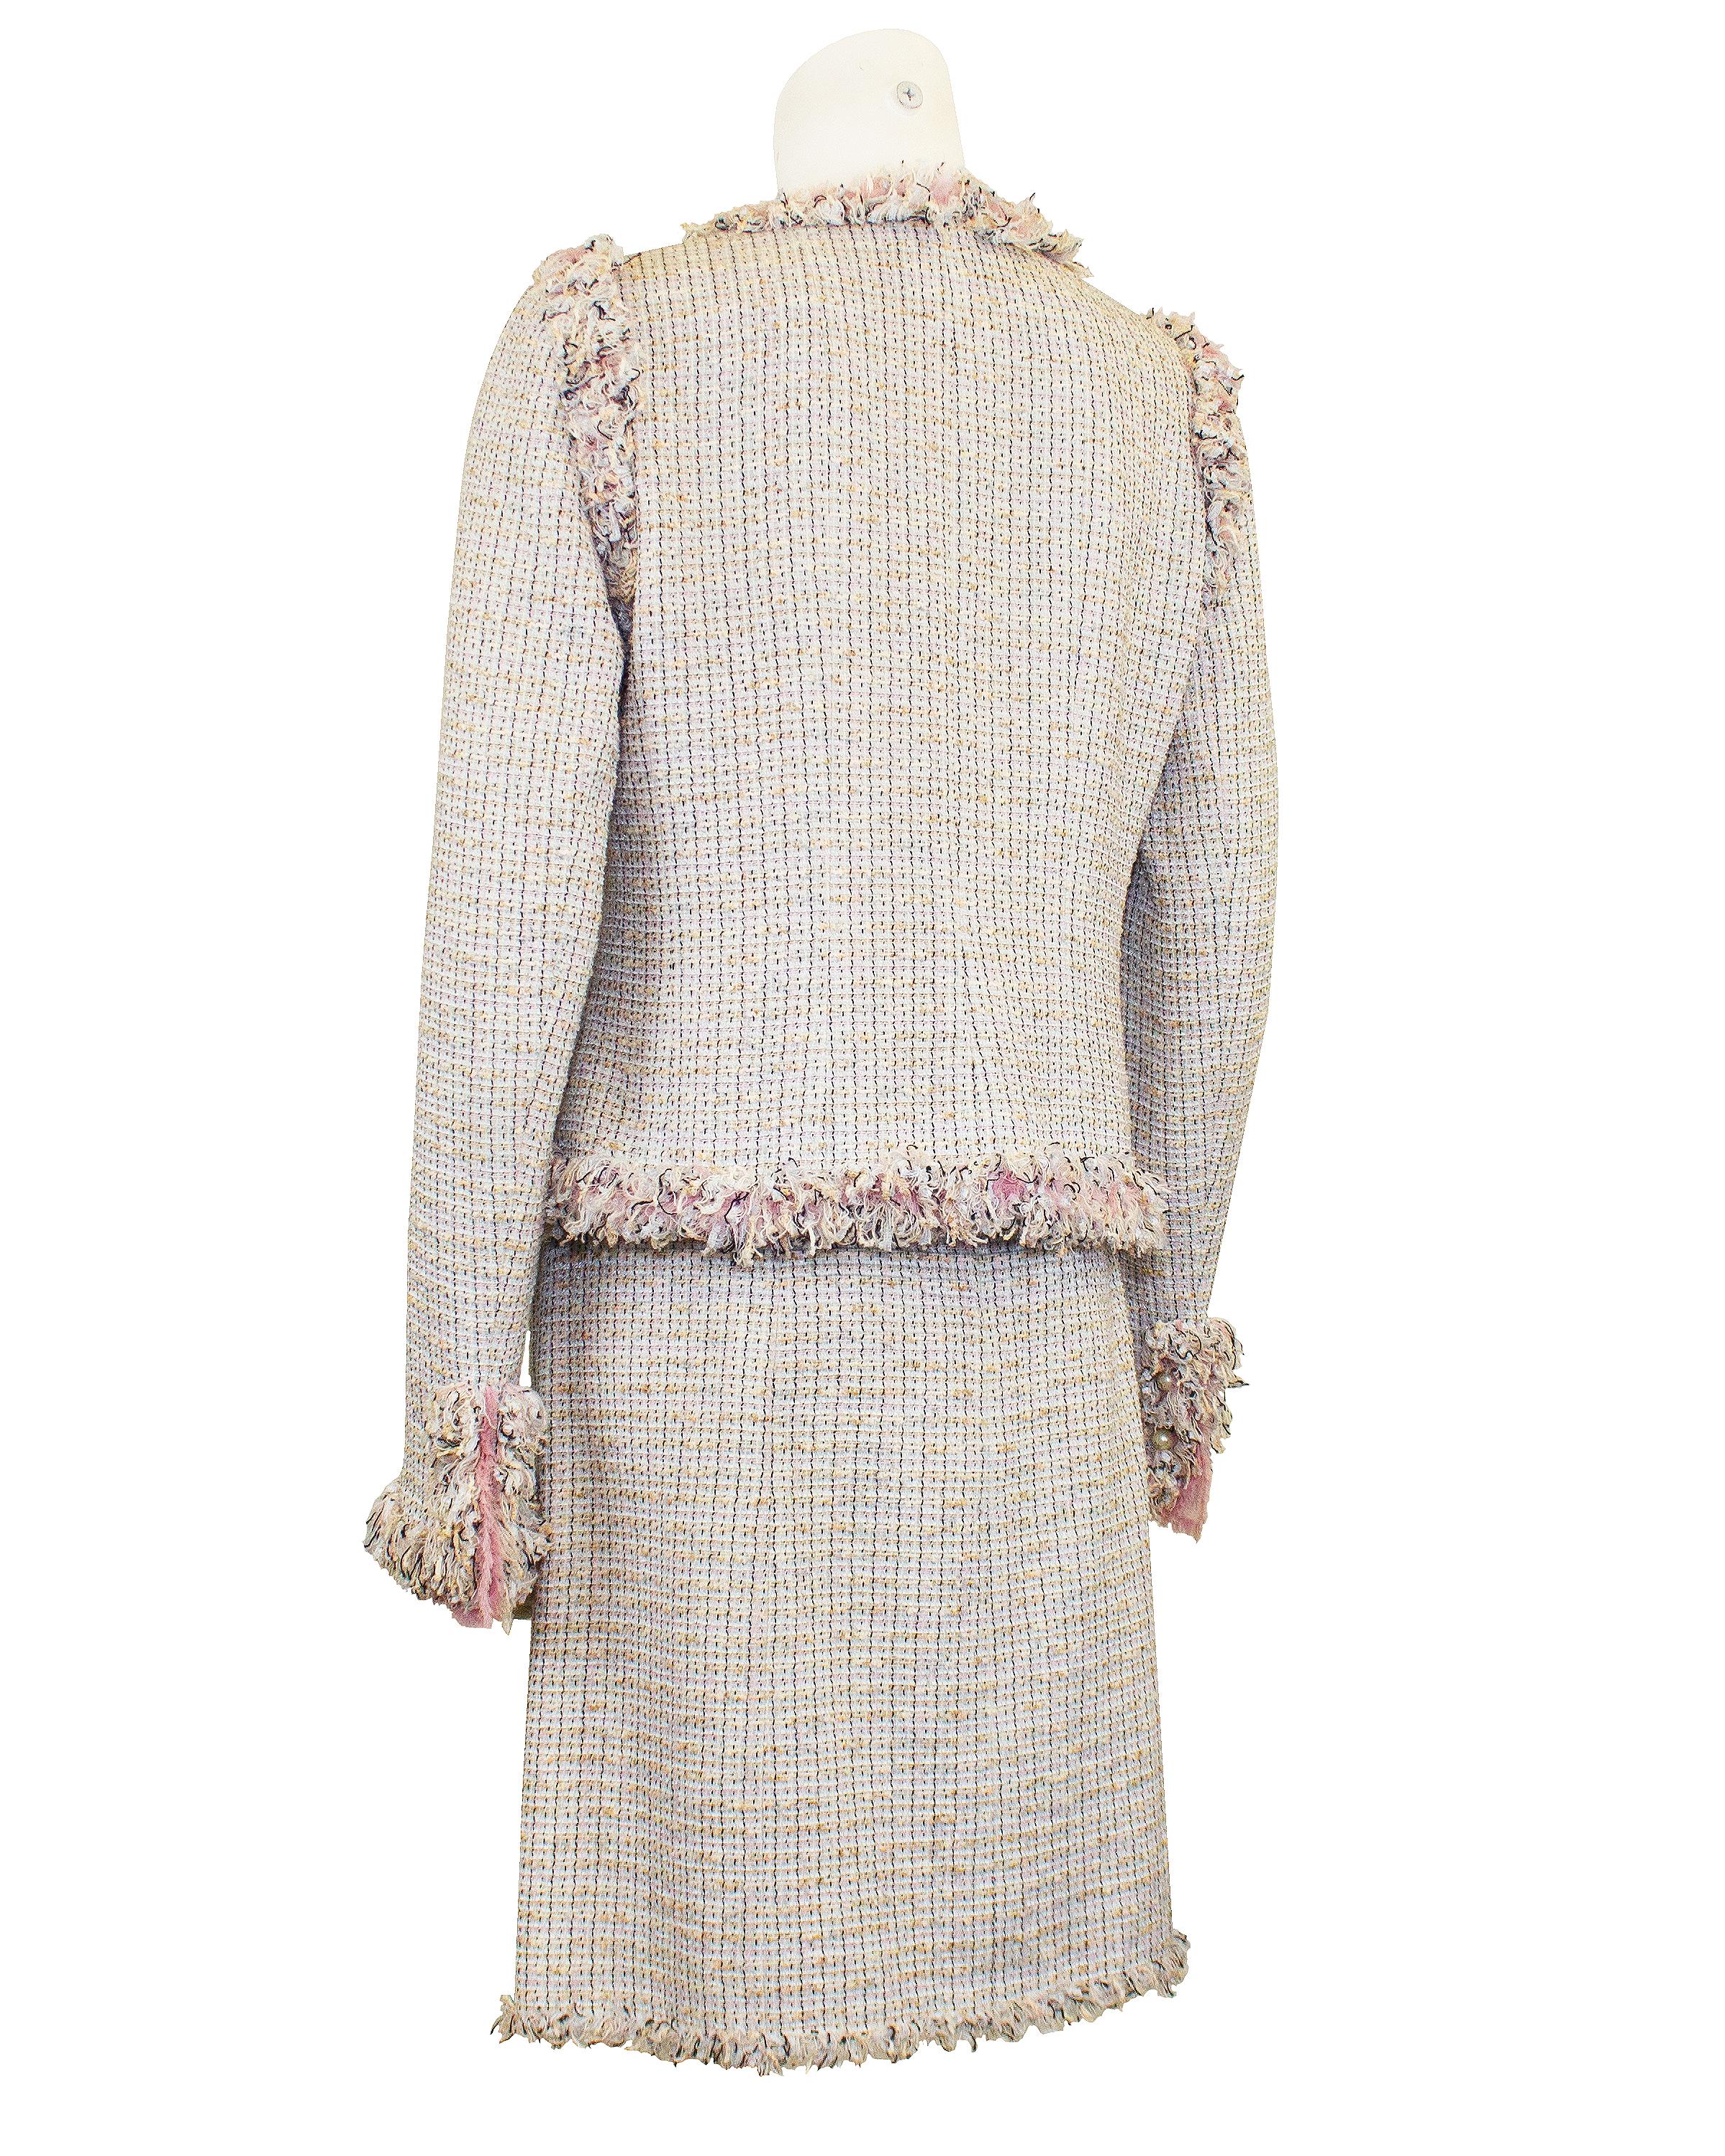 Spring 2004 Chanel Pale Pink Tweed Skirt Suit with Fringe Trim  In Good Condition In Toronto, Ontario